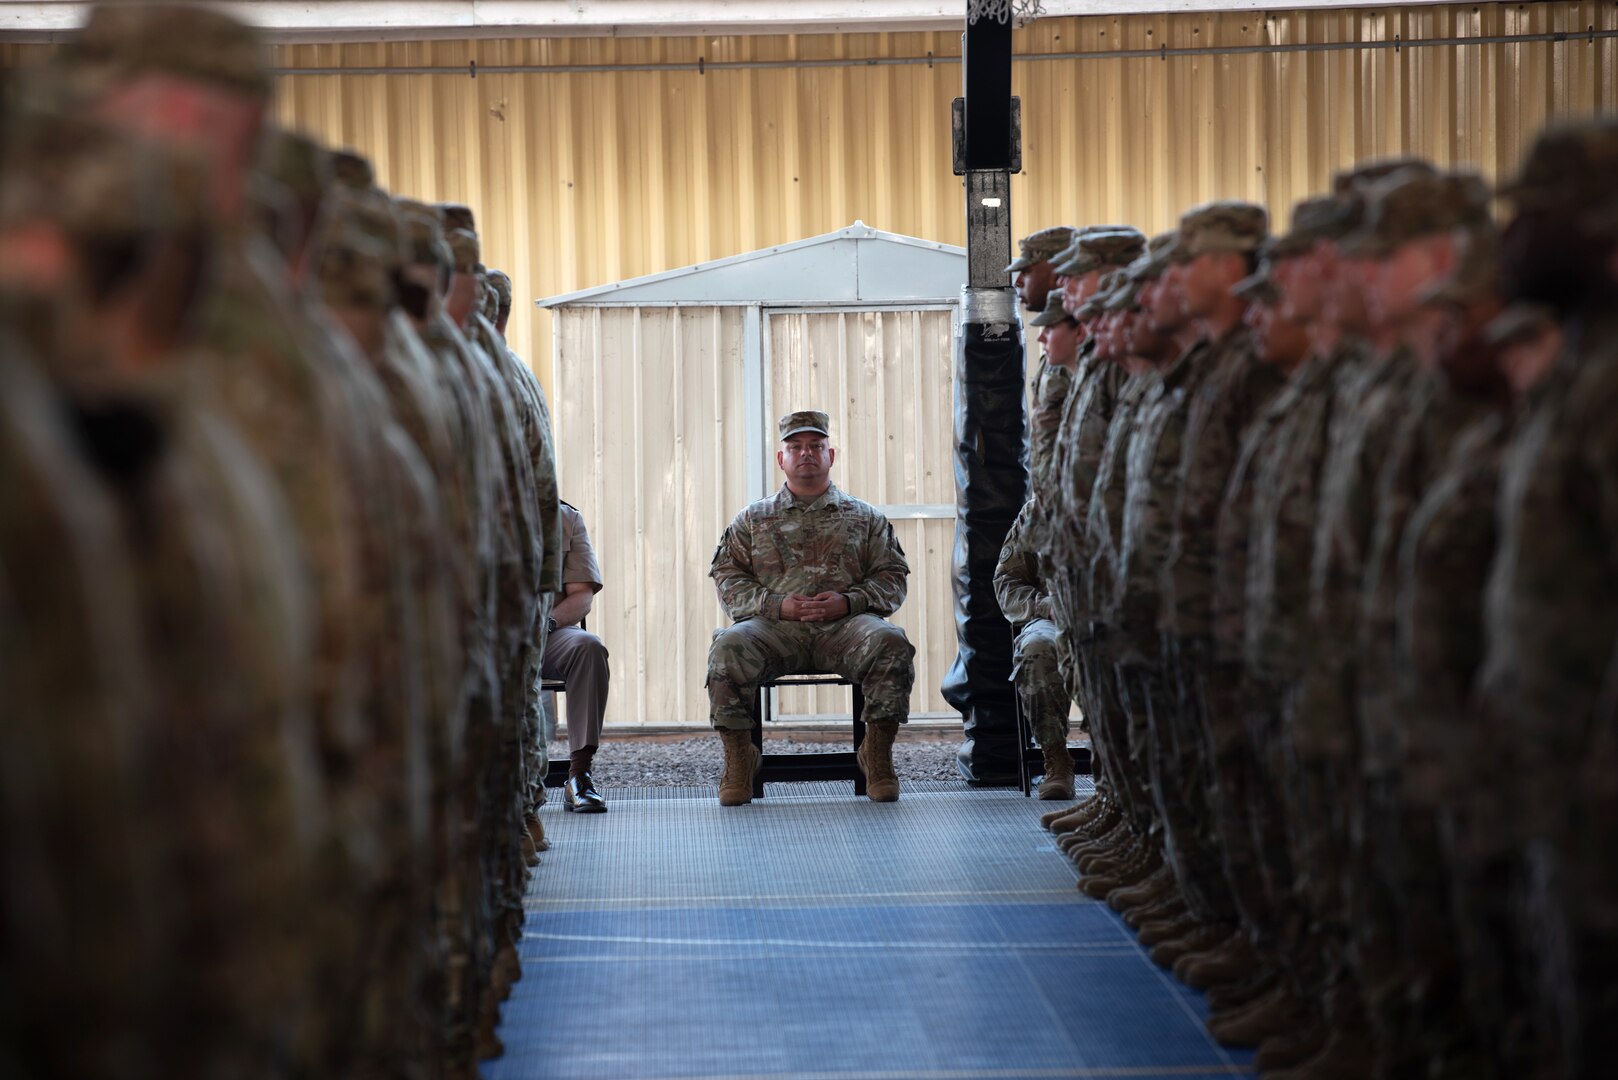 Command Chief Master Sgt. Jason Colón, Combined Joint Task Force - Horn of Africa command senior enlisted leader, observes as members of the 404th Maneuver Enhancement Brigade wait to receive their combat patches